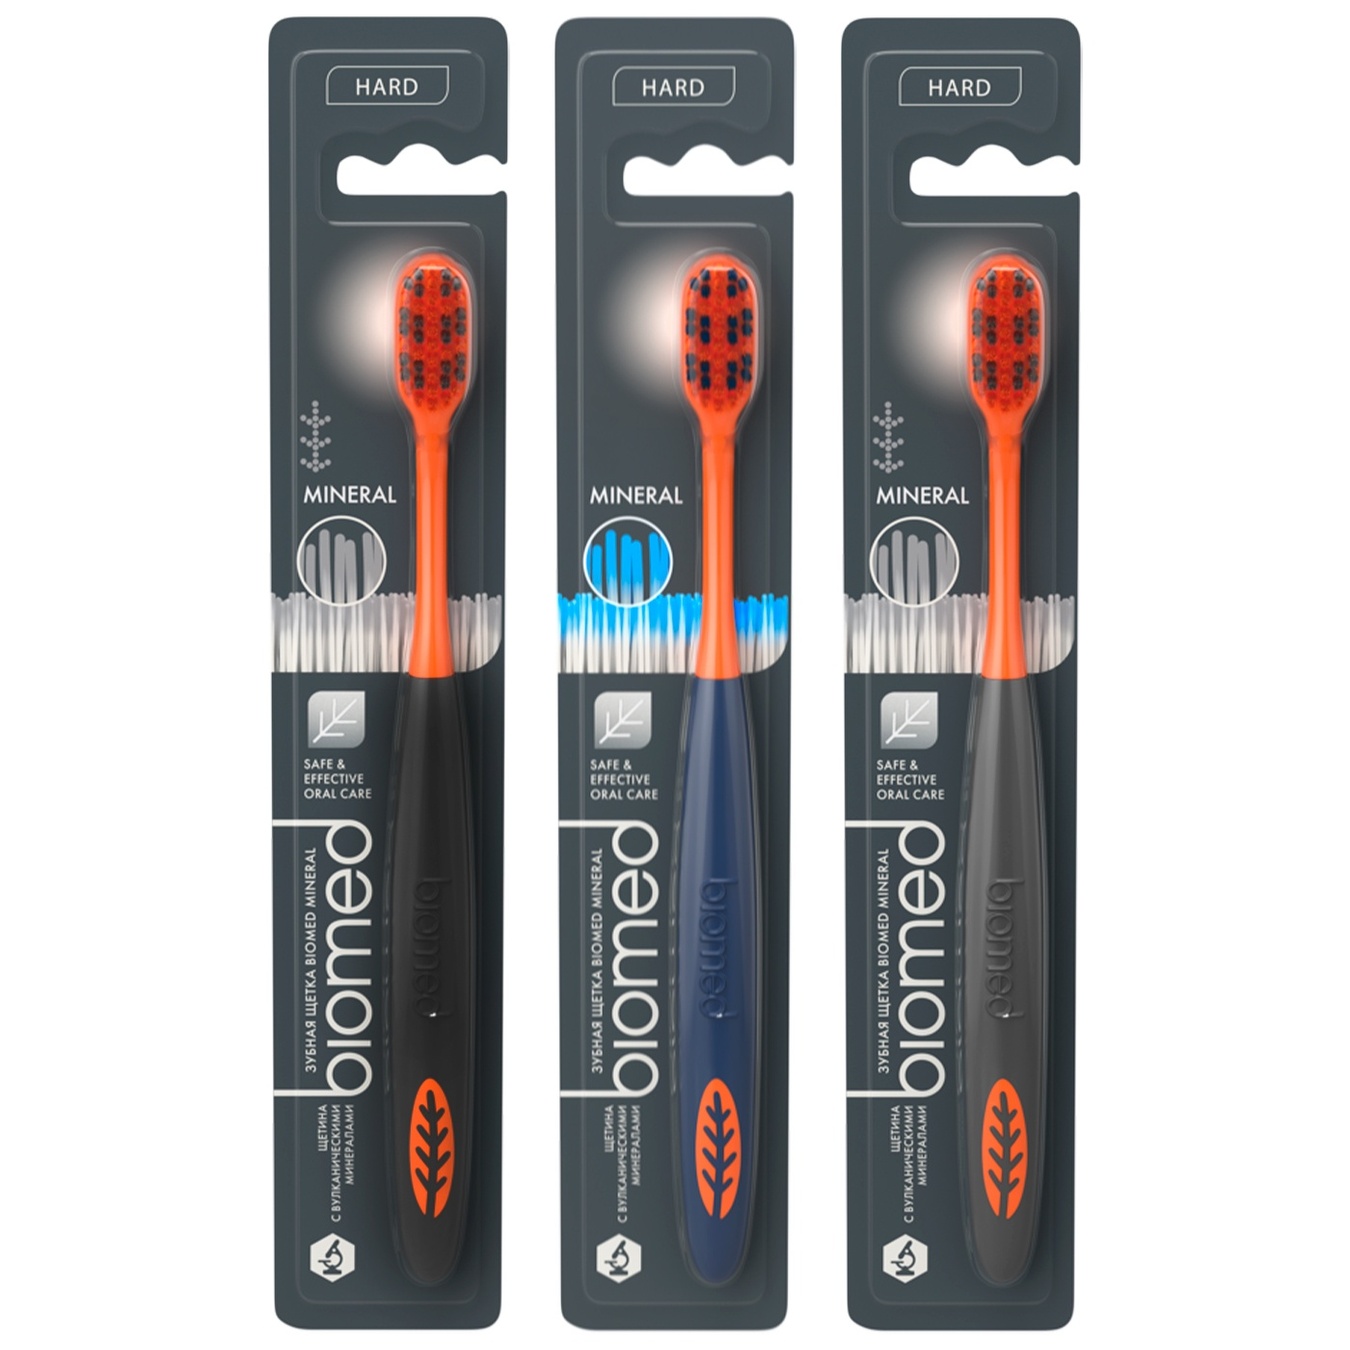 The Biomed Mineral Hard toothbrush is hard 2